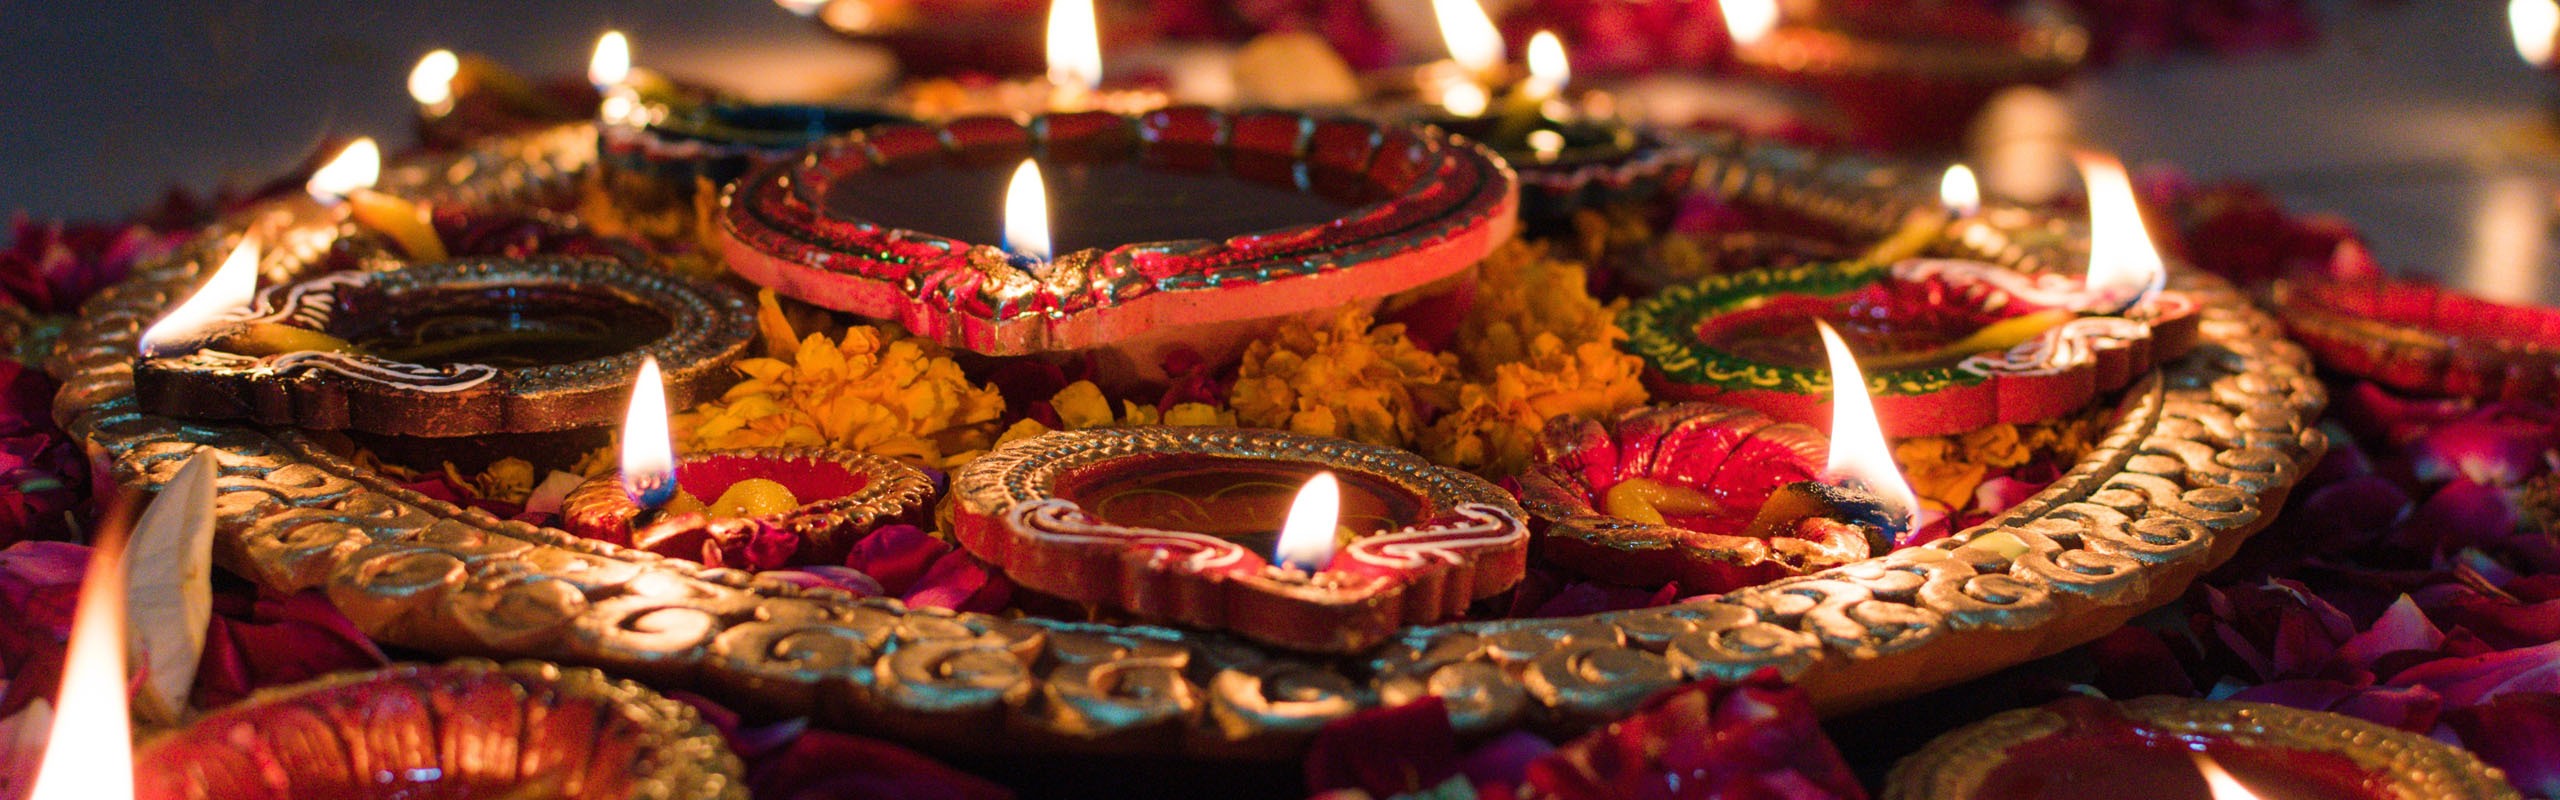 8-Day Diwali Festival in India Highlights Tour